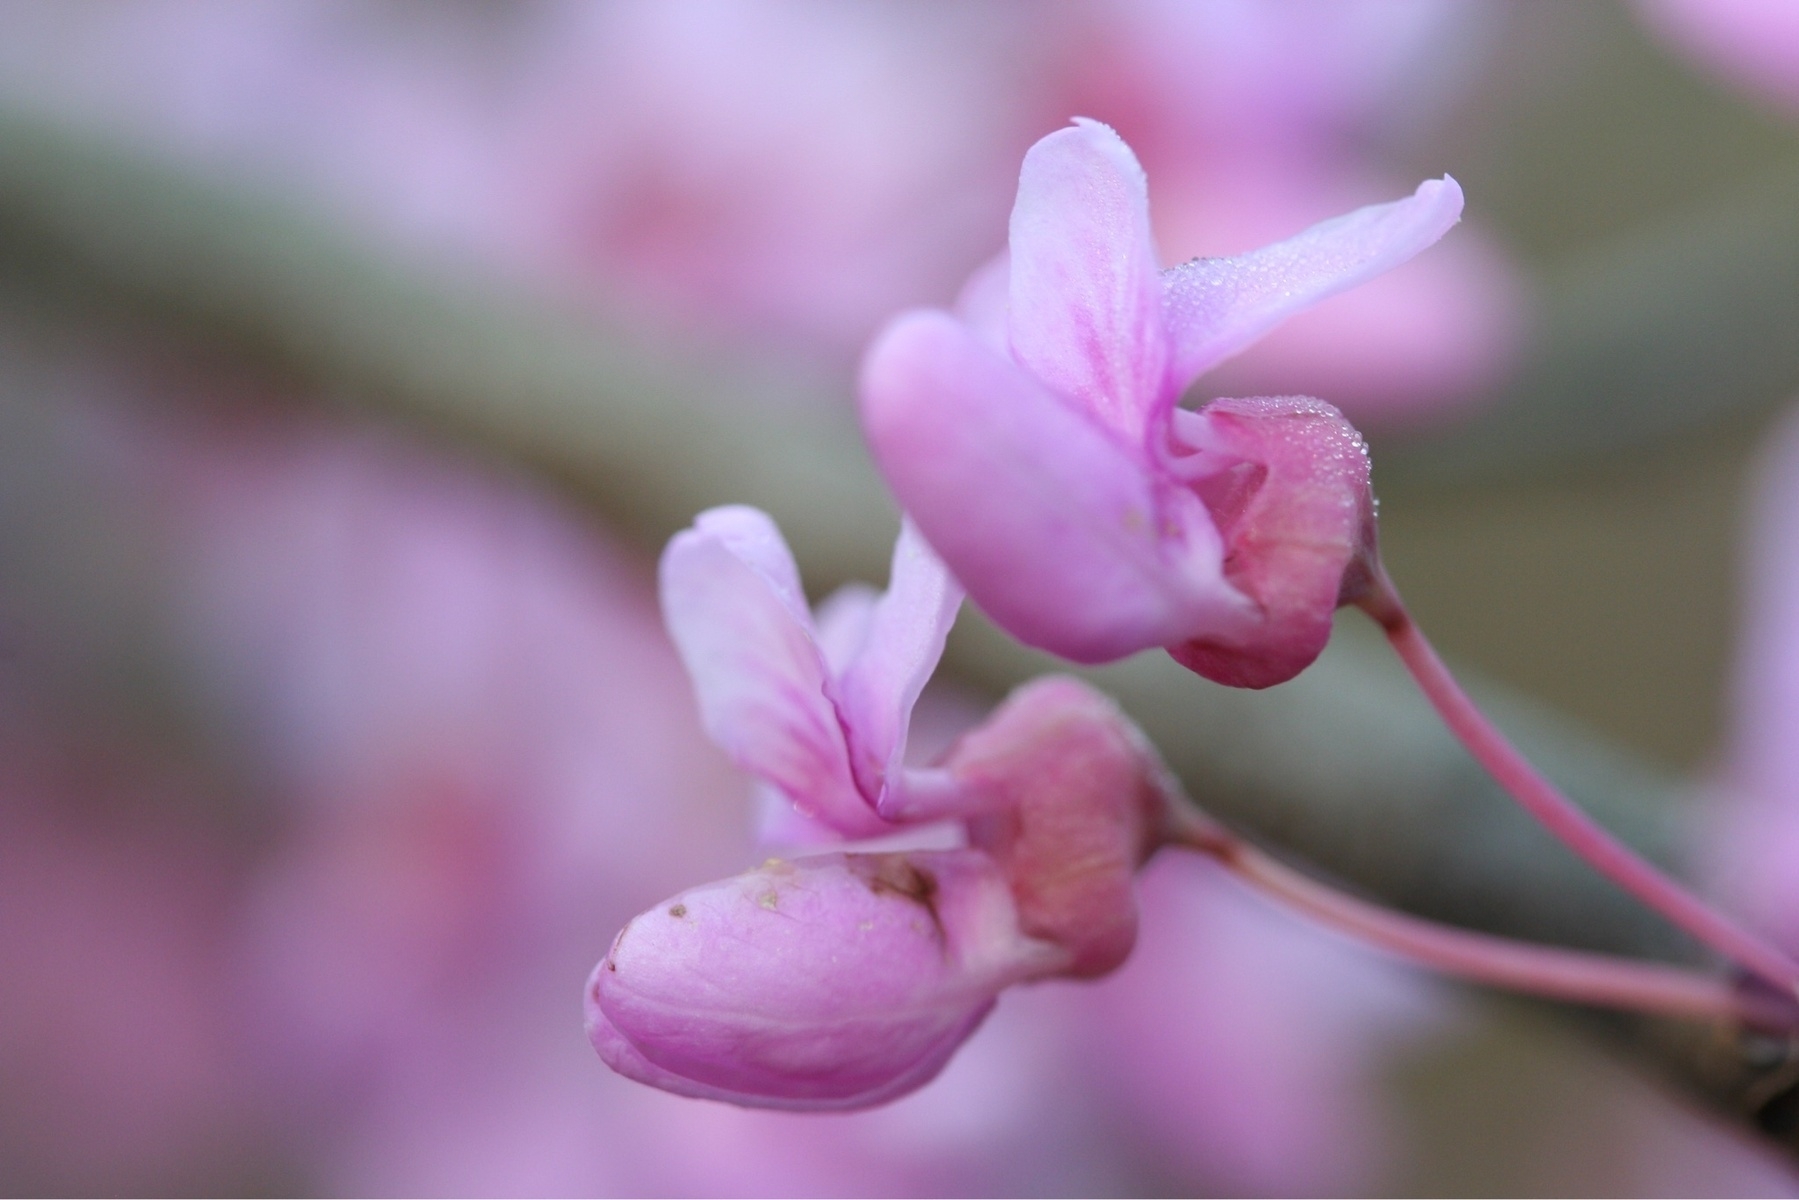 soft, pink flowers of the red bud tree. The picture is soft with a dreamy paint effect due to the  shallow depth of field. The flowers have three petals at the top with a bulbous bottom formation.